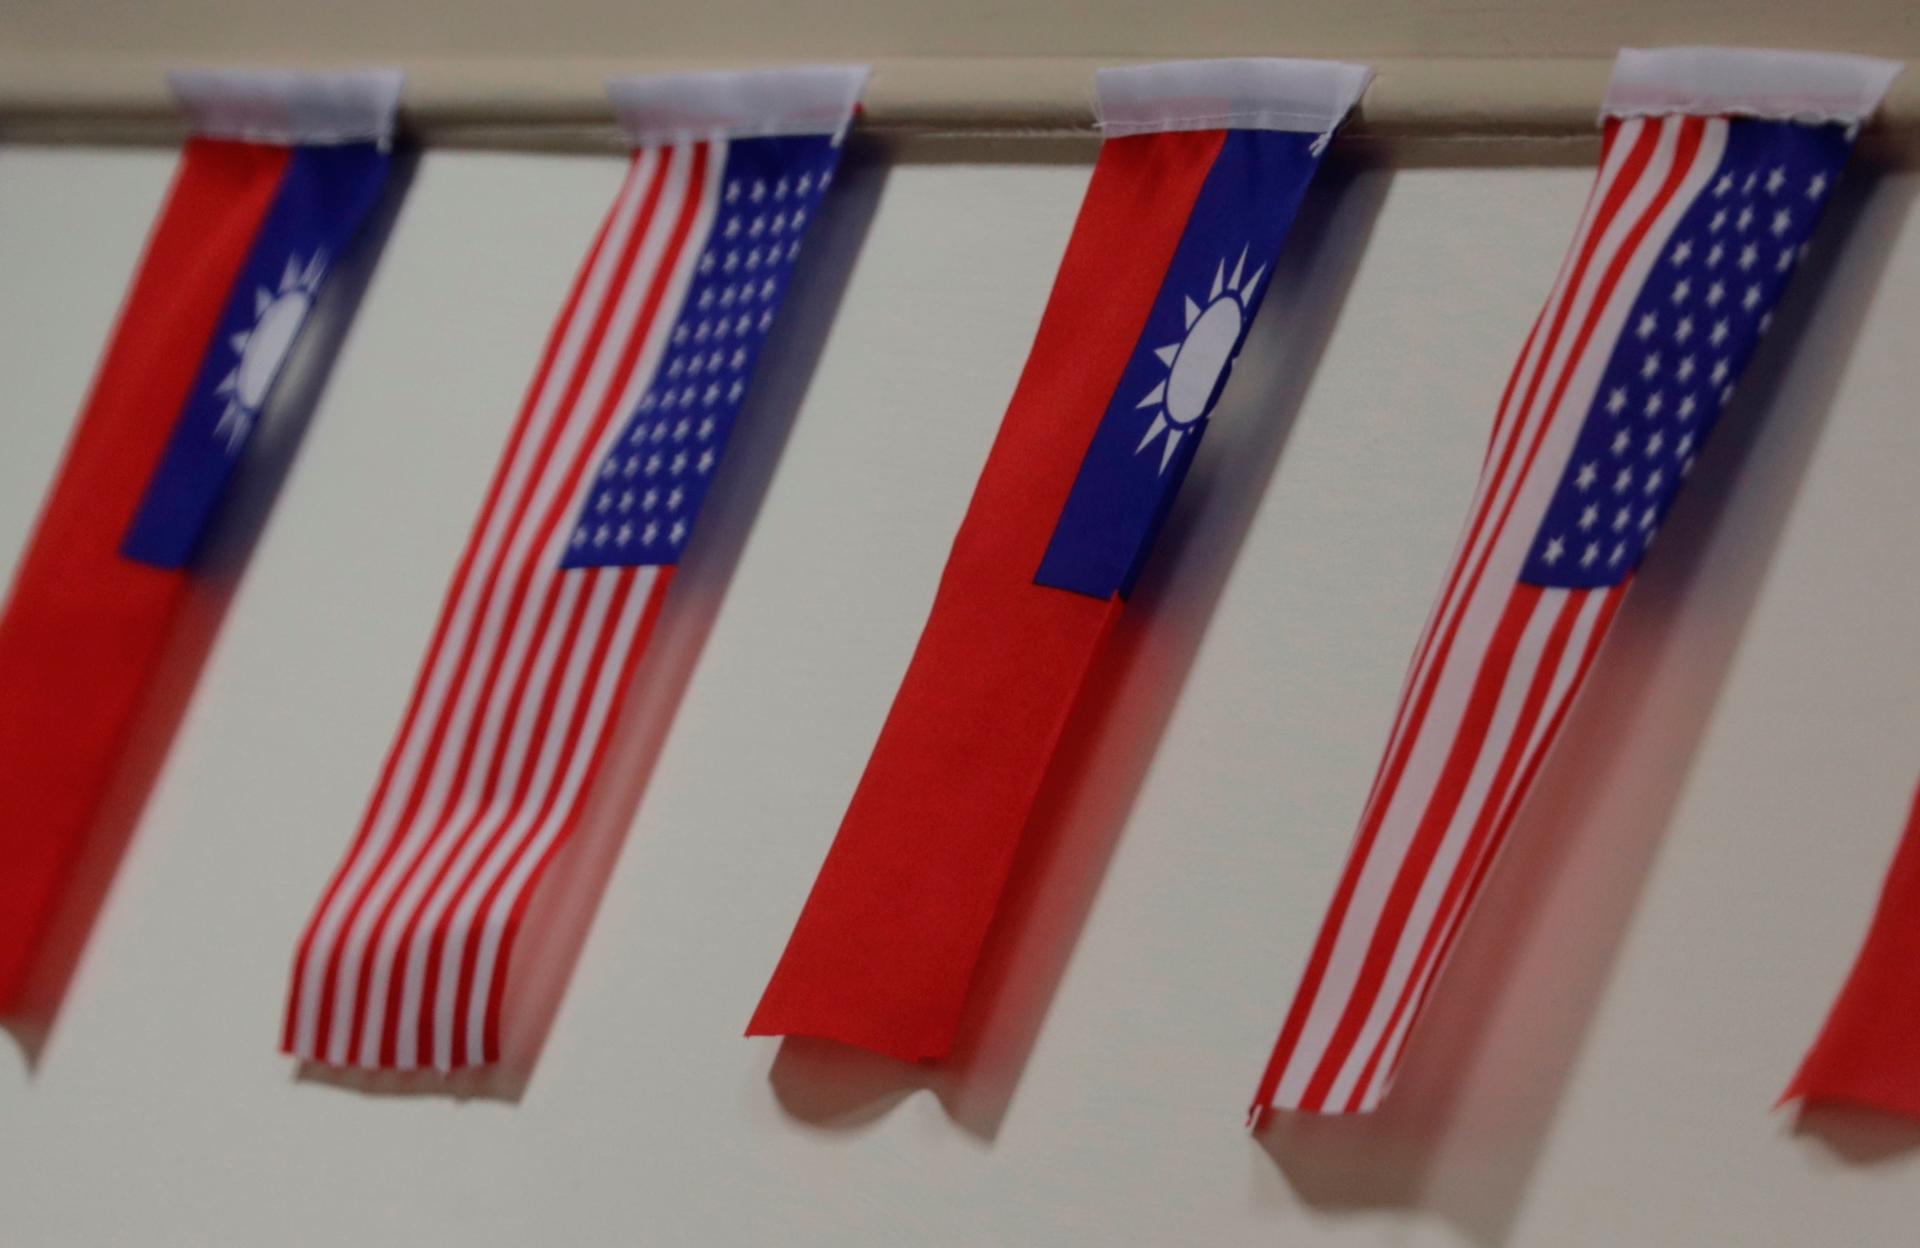 The flags of Taiwan and USA are on display during the ceremonial opening of the 'Taiwan Council for US Affairs' office in Taipei, Taiwan, 06 June 2019. EPA/RITCHIE B. TONGO